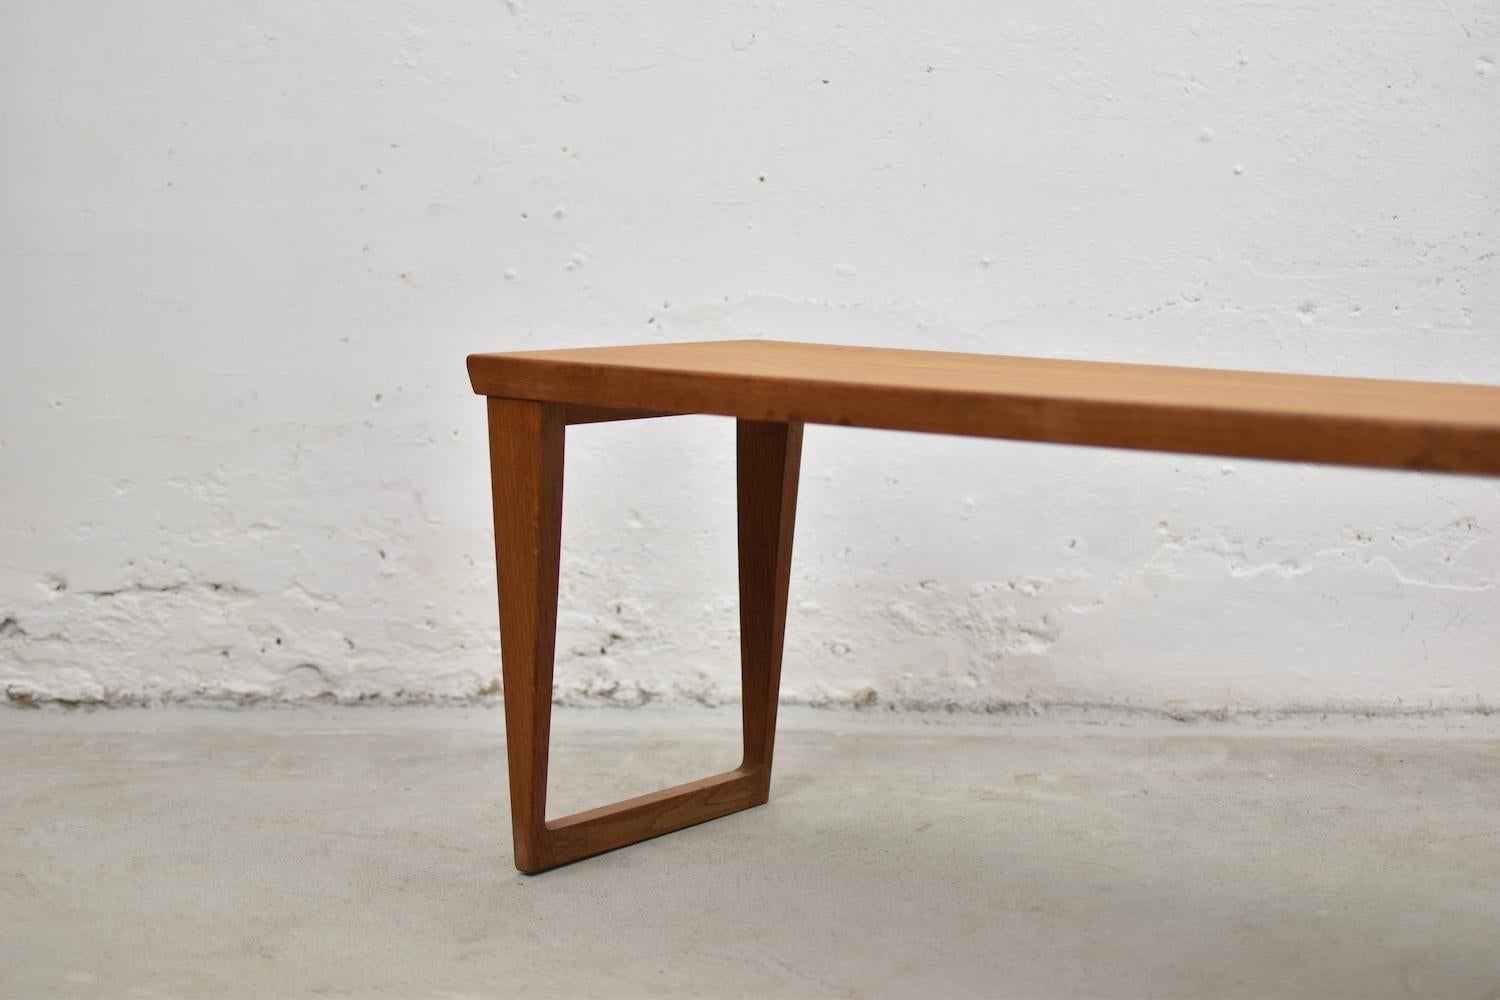 Lovely Minimalist low bench or side table designed by Kai Kristiansen for Aksel Kjersgaard, Denmark 1960s. This is Model No. 36 and is made out of oak. Very elegant and modern in any interior. Clean lines, perfect size. Professionally restored.